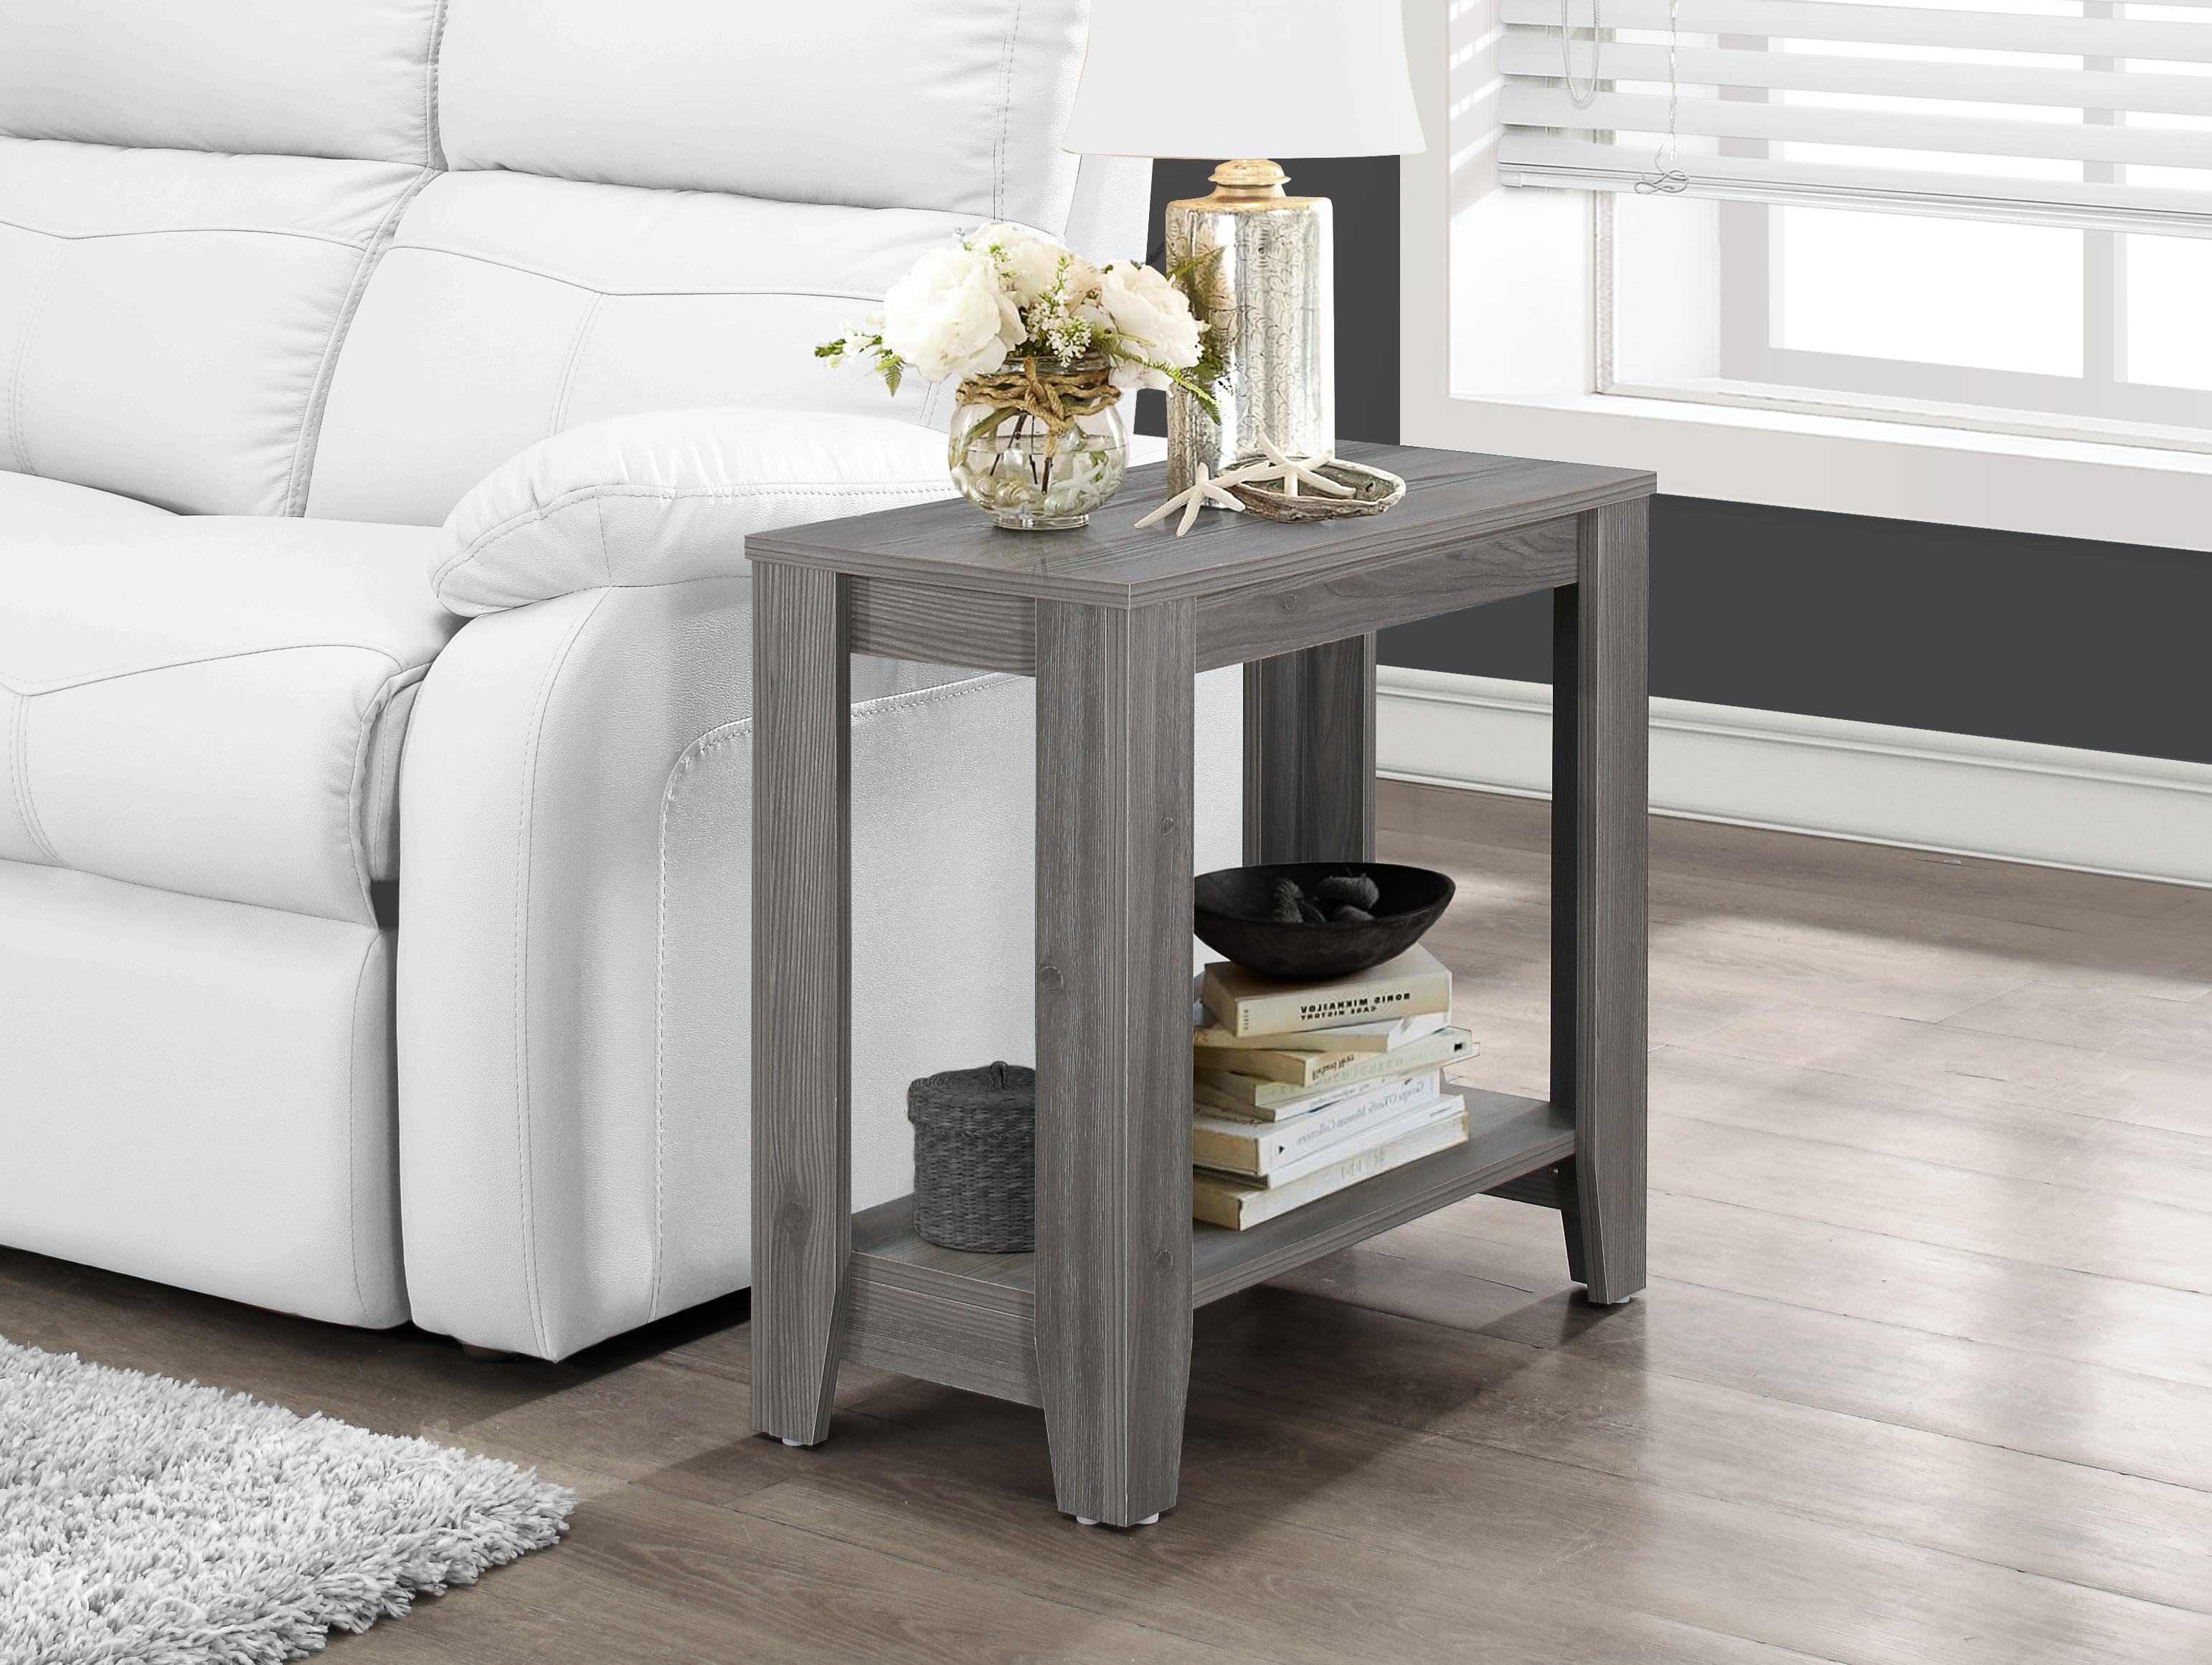 Monarch Specialties Accent Table 24"Lx22"H with shelf